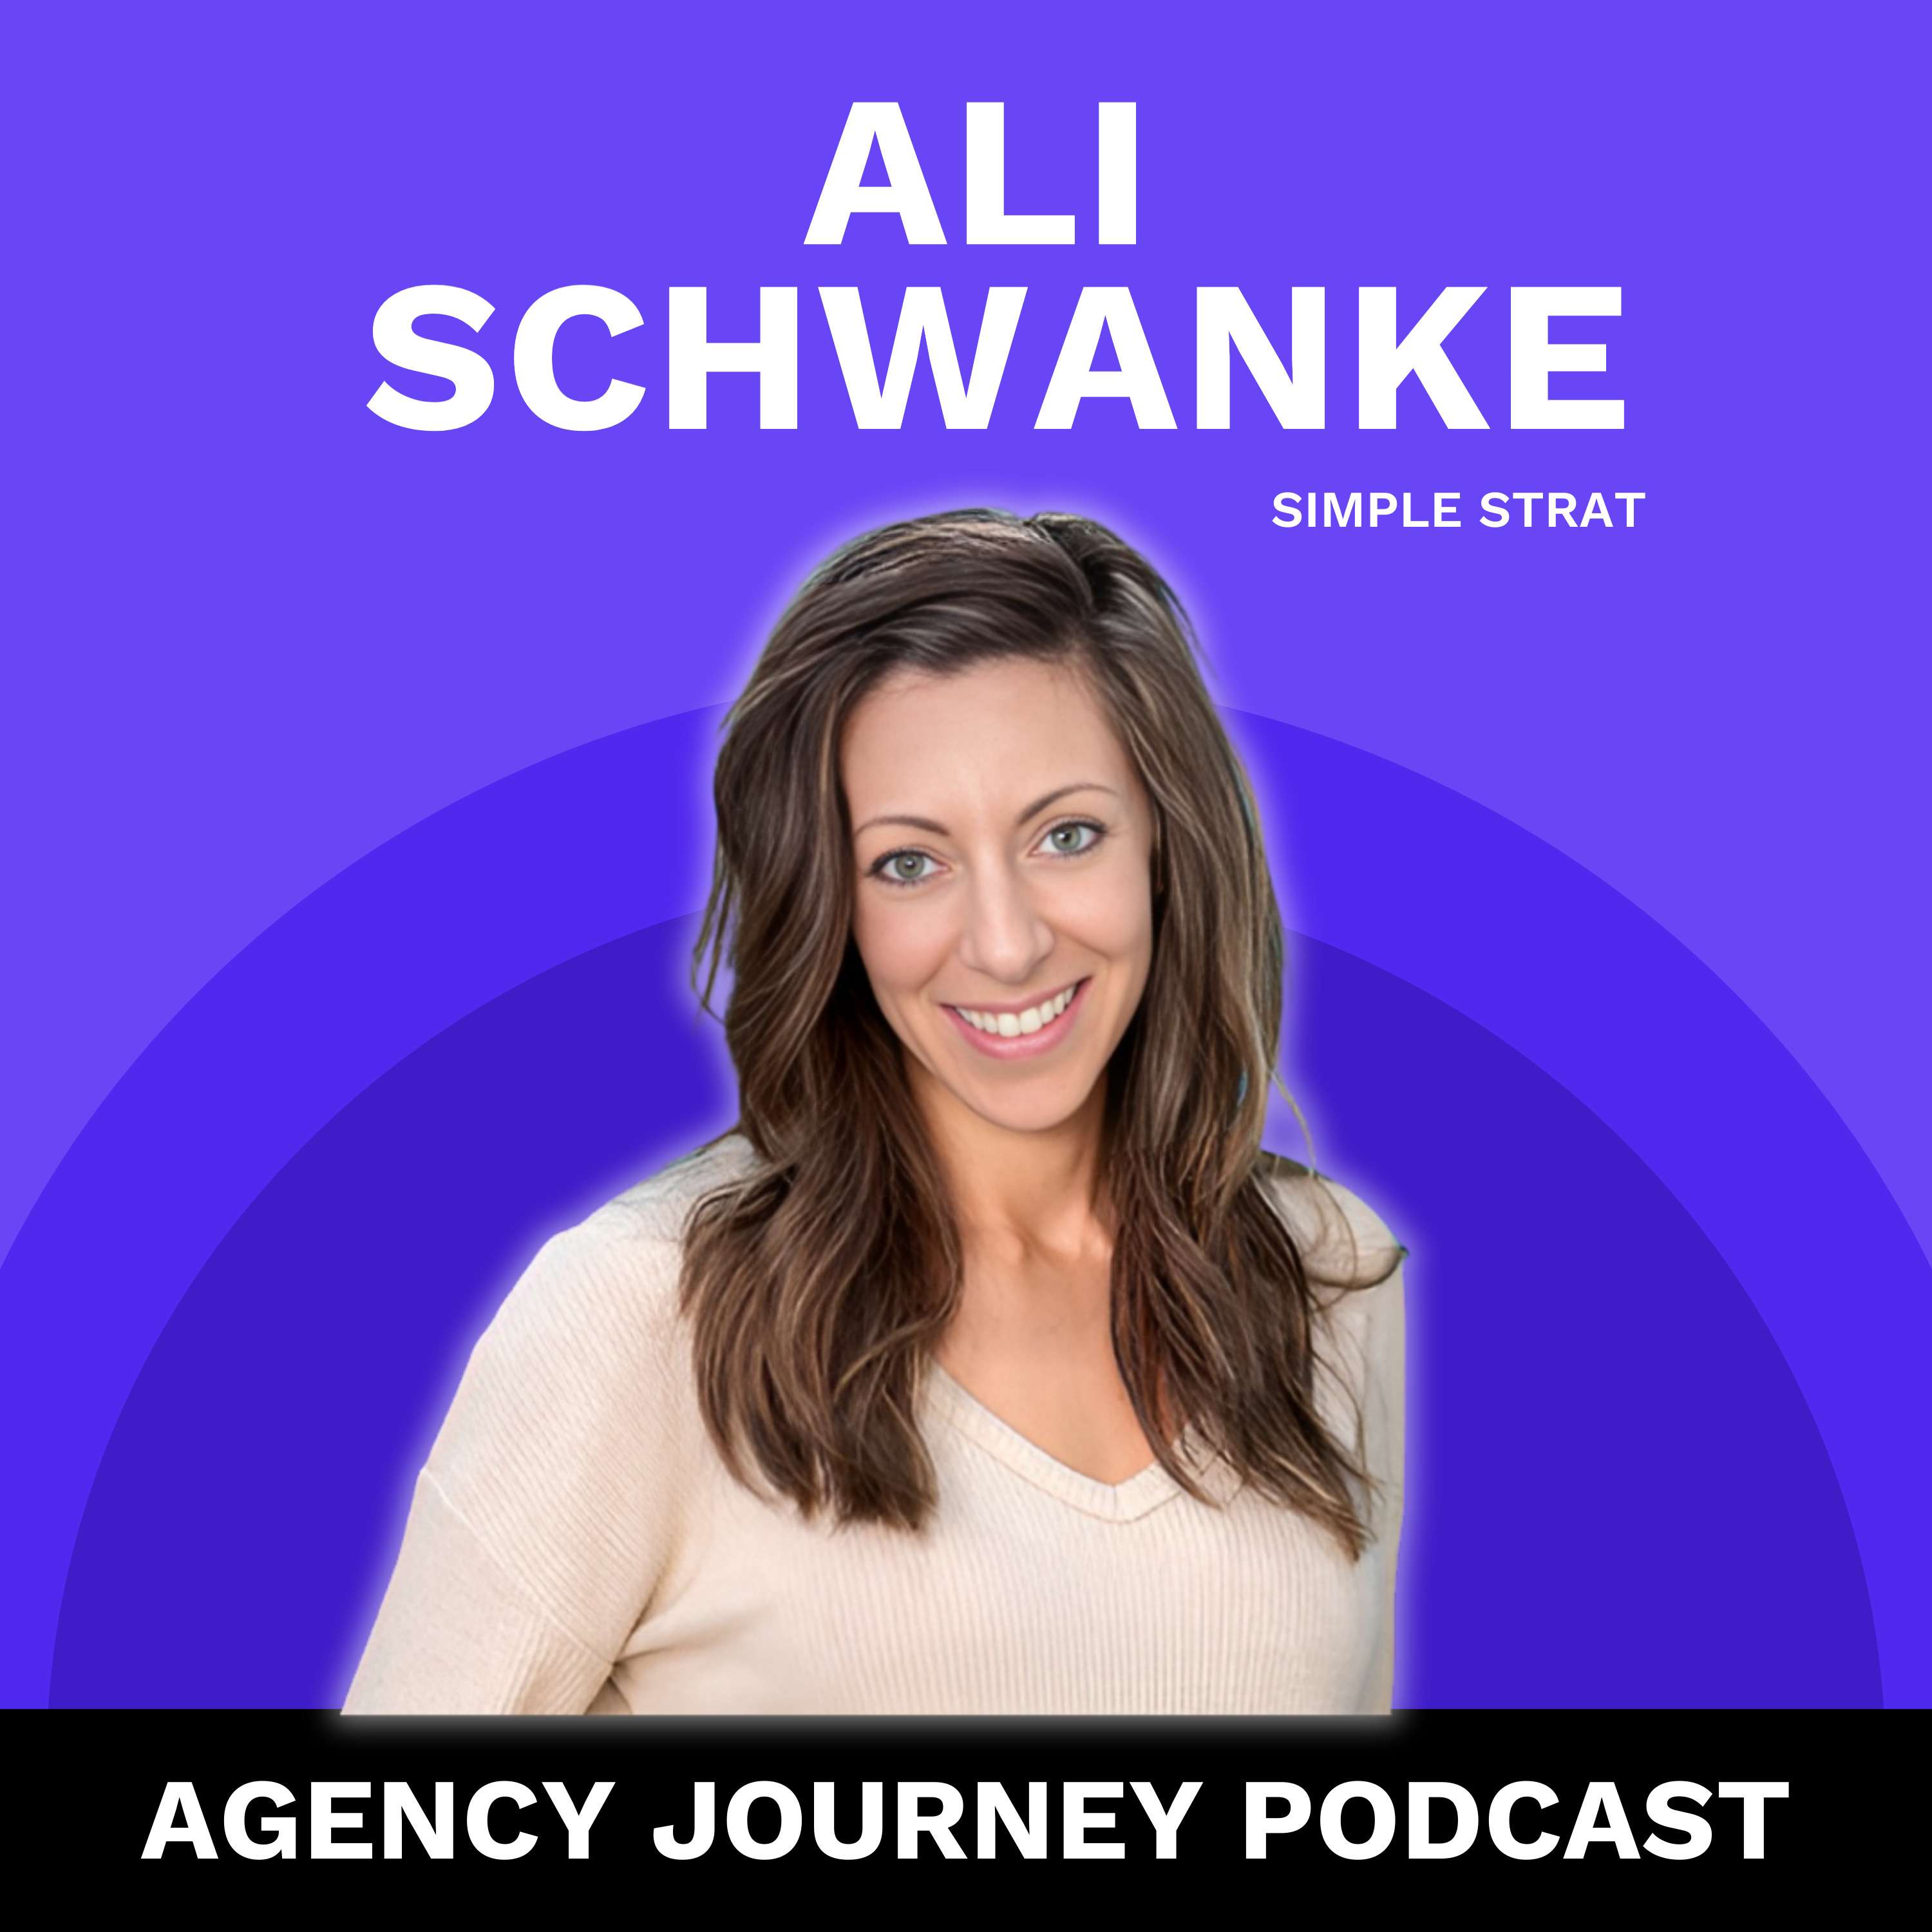 YouTube Content Ideas, Owner Mindset, and Recognizing Your Leadership Style with Ali Schwanke